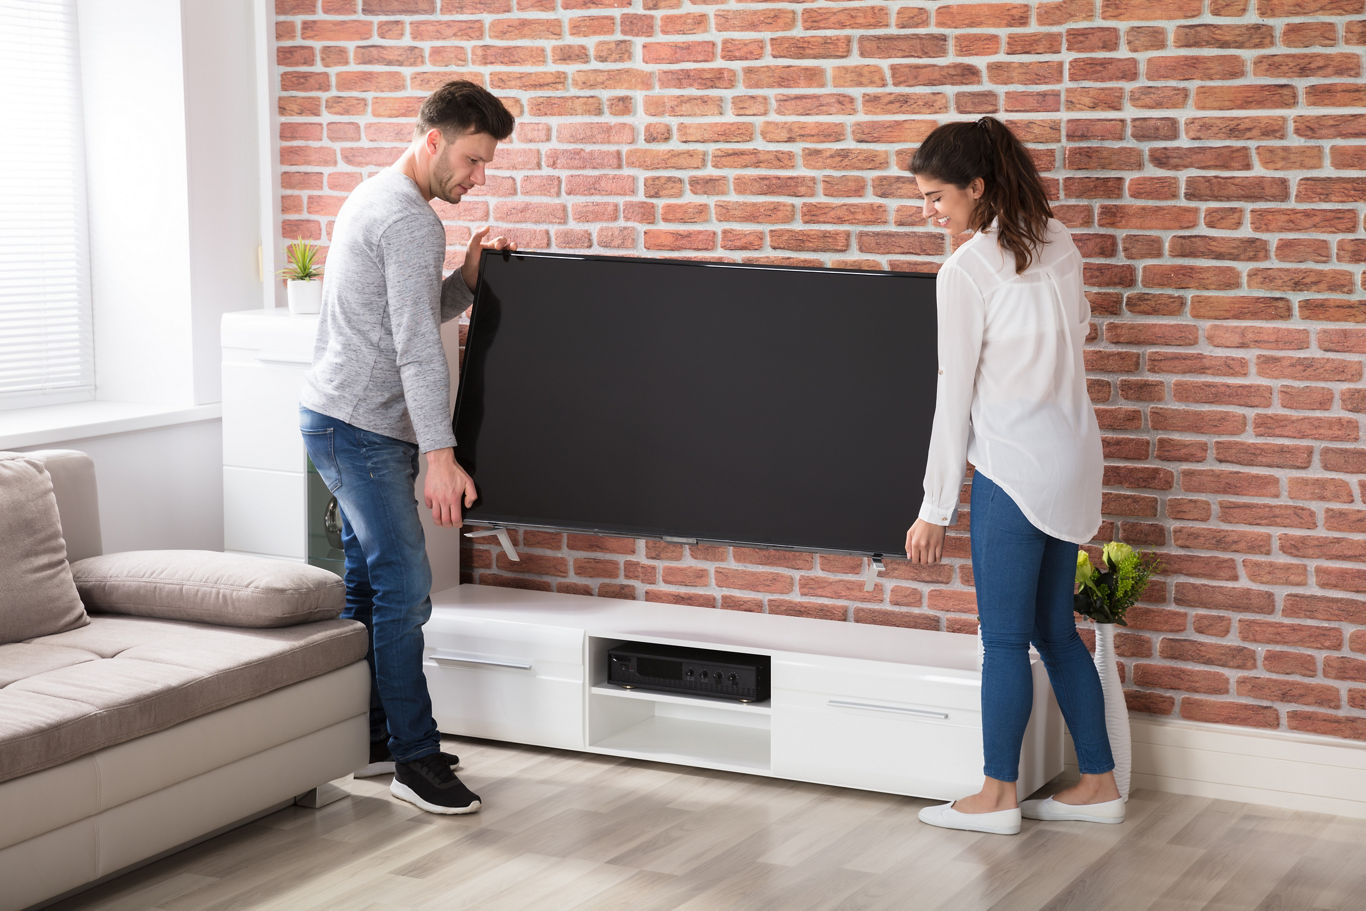 Couple Moving Television into an Apartment | Blog | Greystar